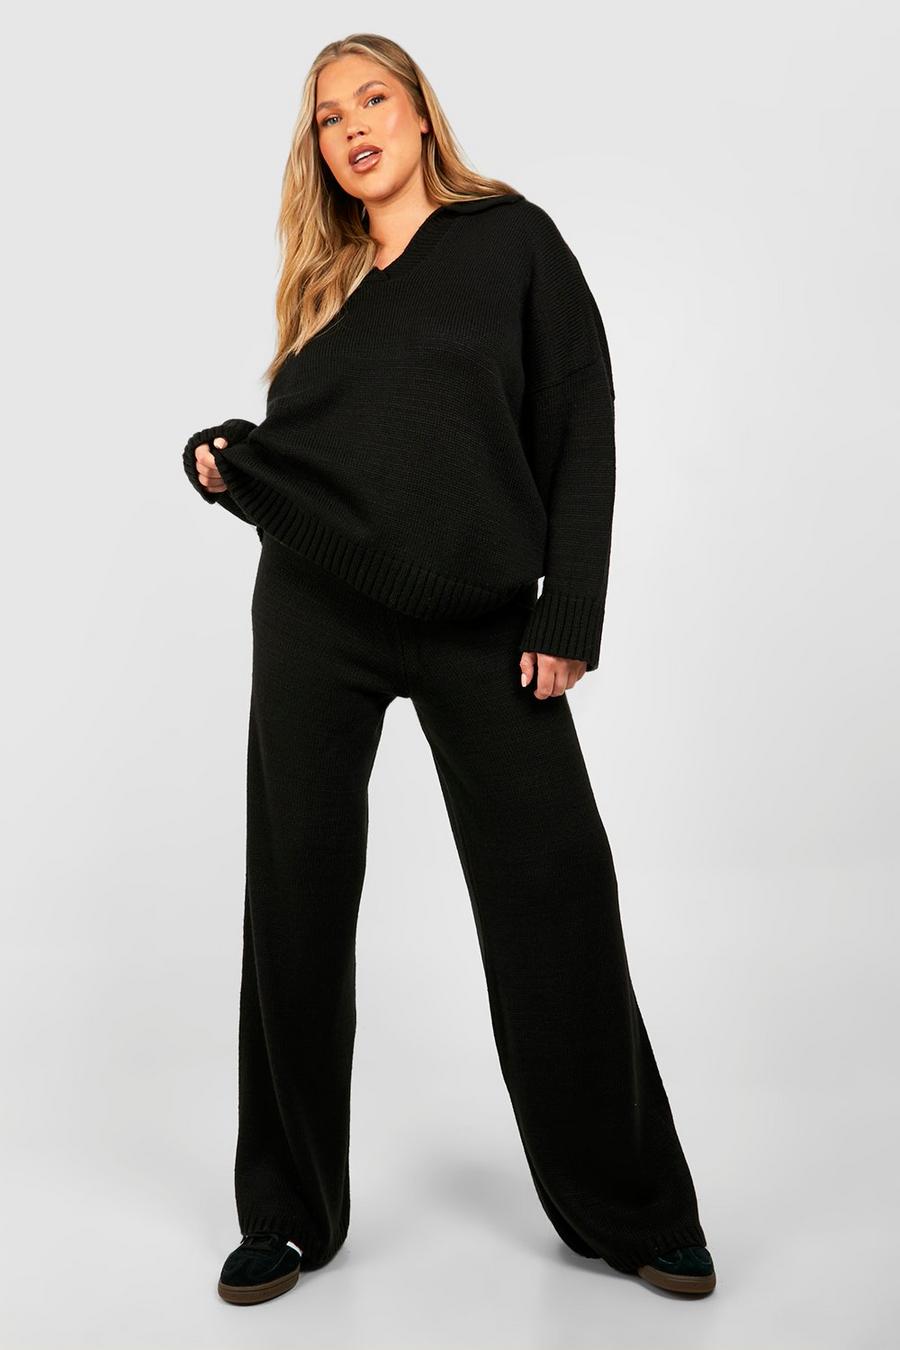 Black Plus Collared Jumper And Wide Leg Trouser Set